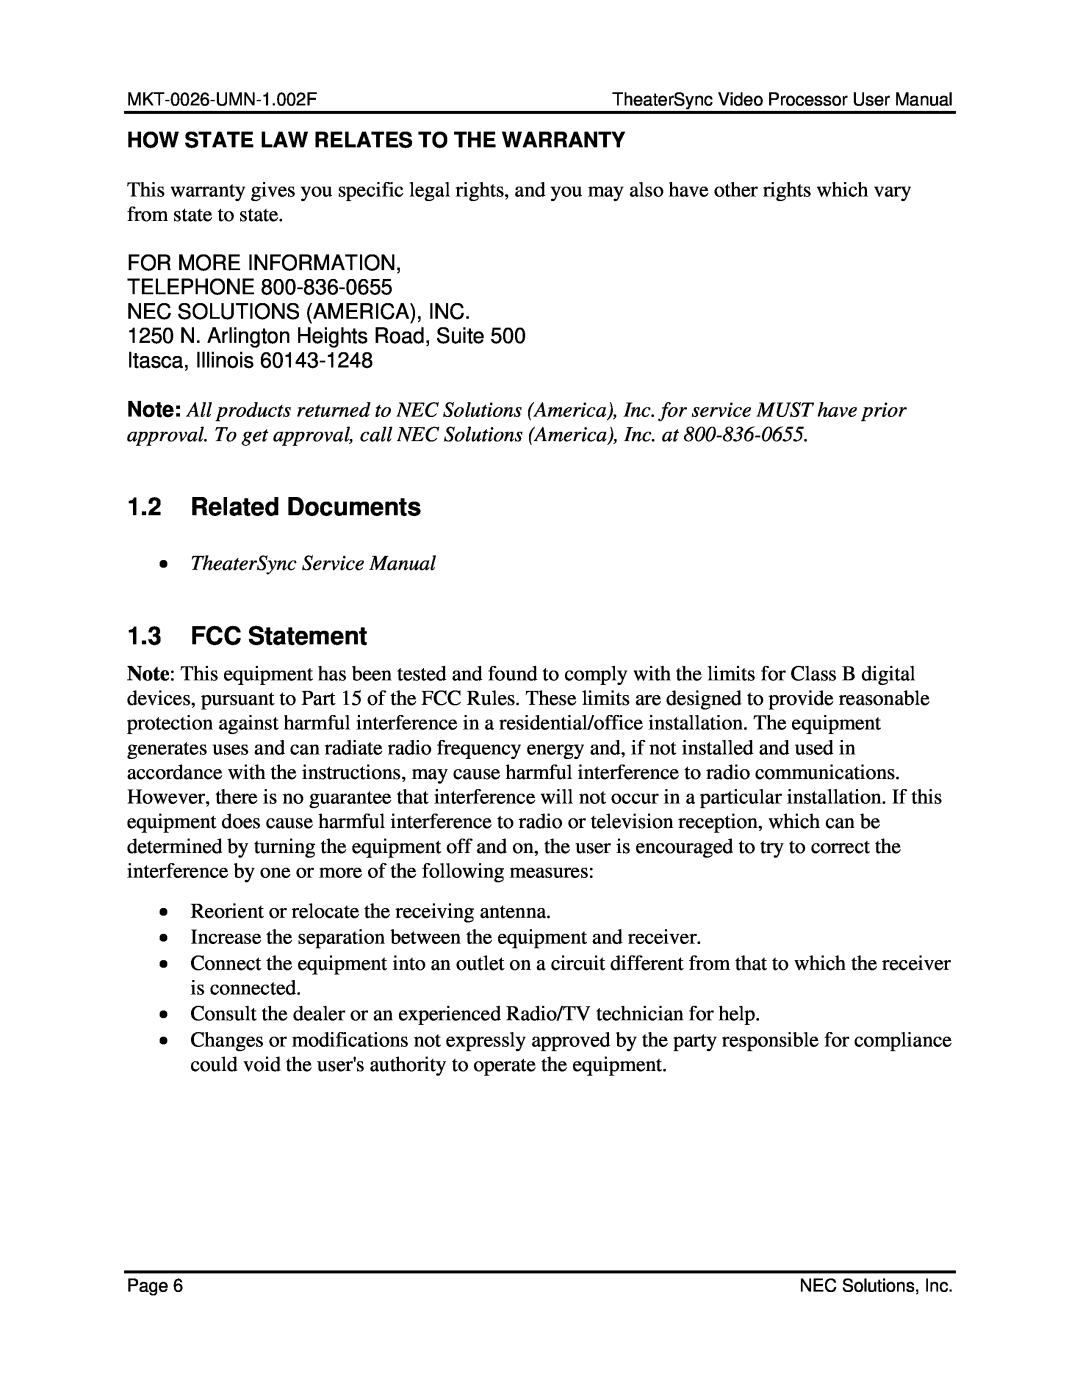 NEC TheaterSync Video Processor user manual 1.2Related Documents, 1.3FCC Statement, How State Law Relates To The Warranty 